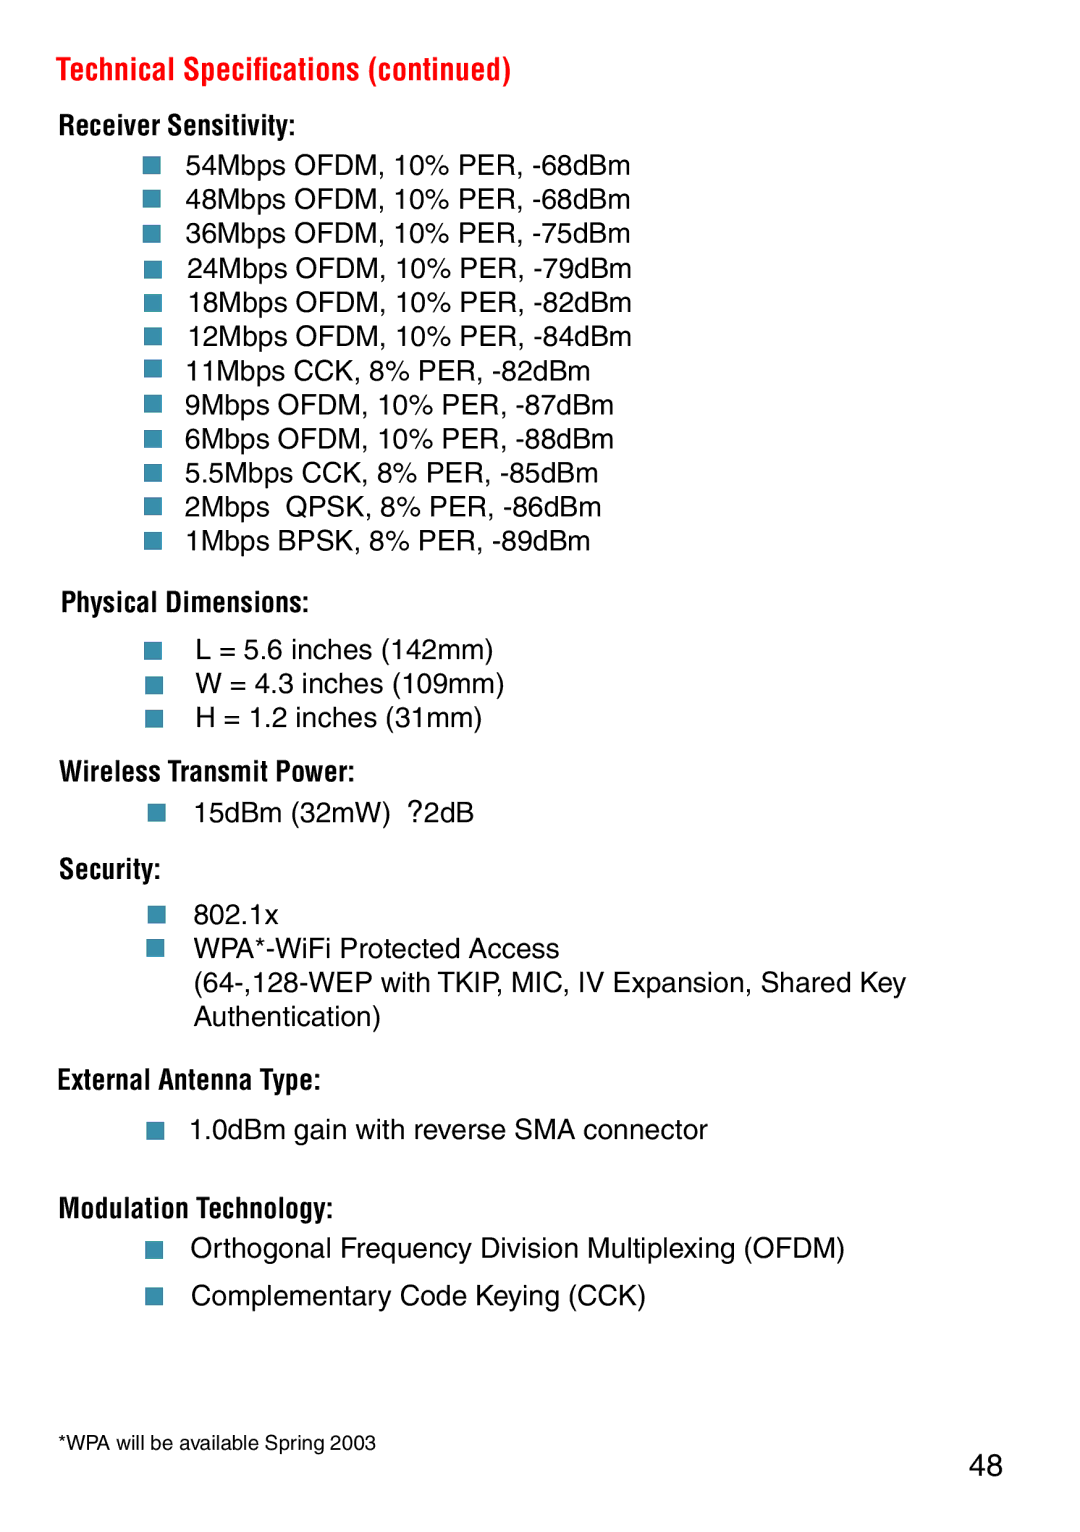 D-Link DWL-2000AP manual Technical Speciﬁcations 